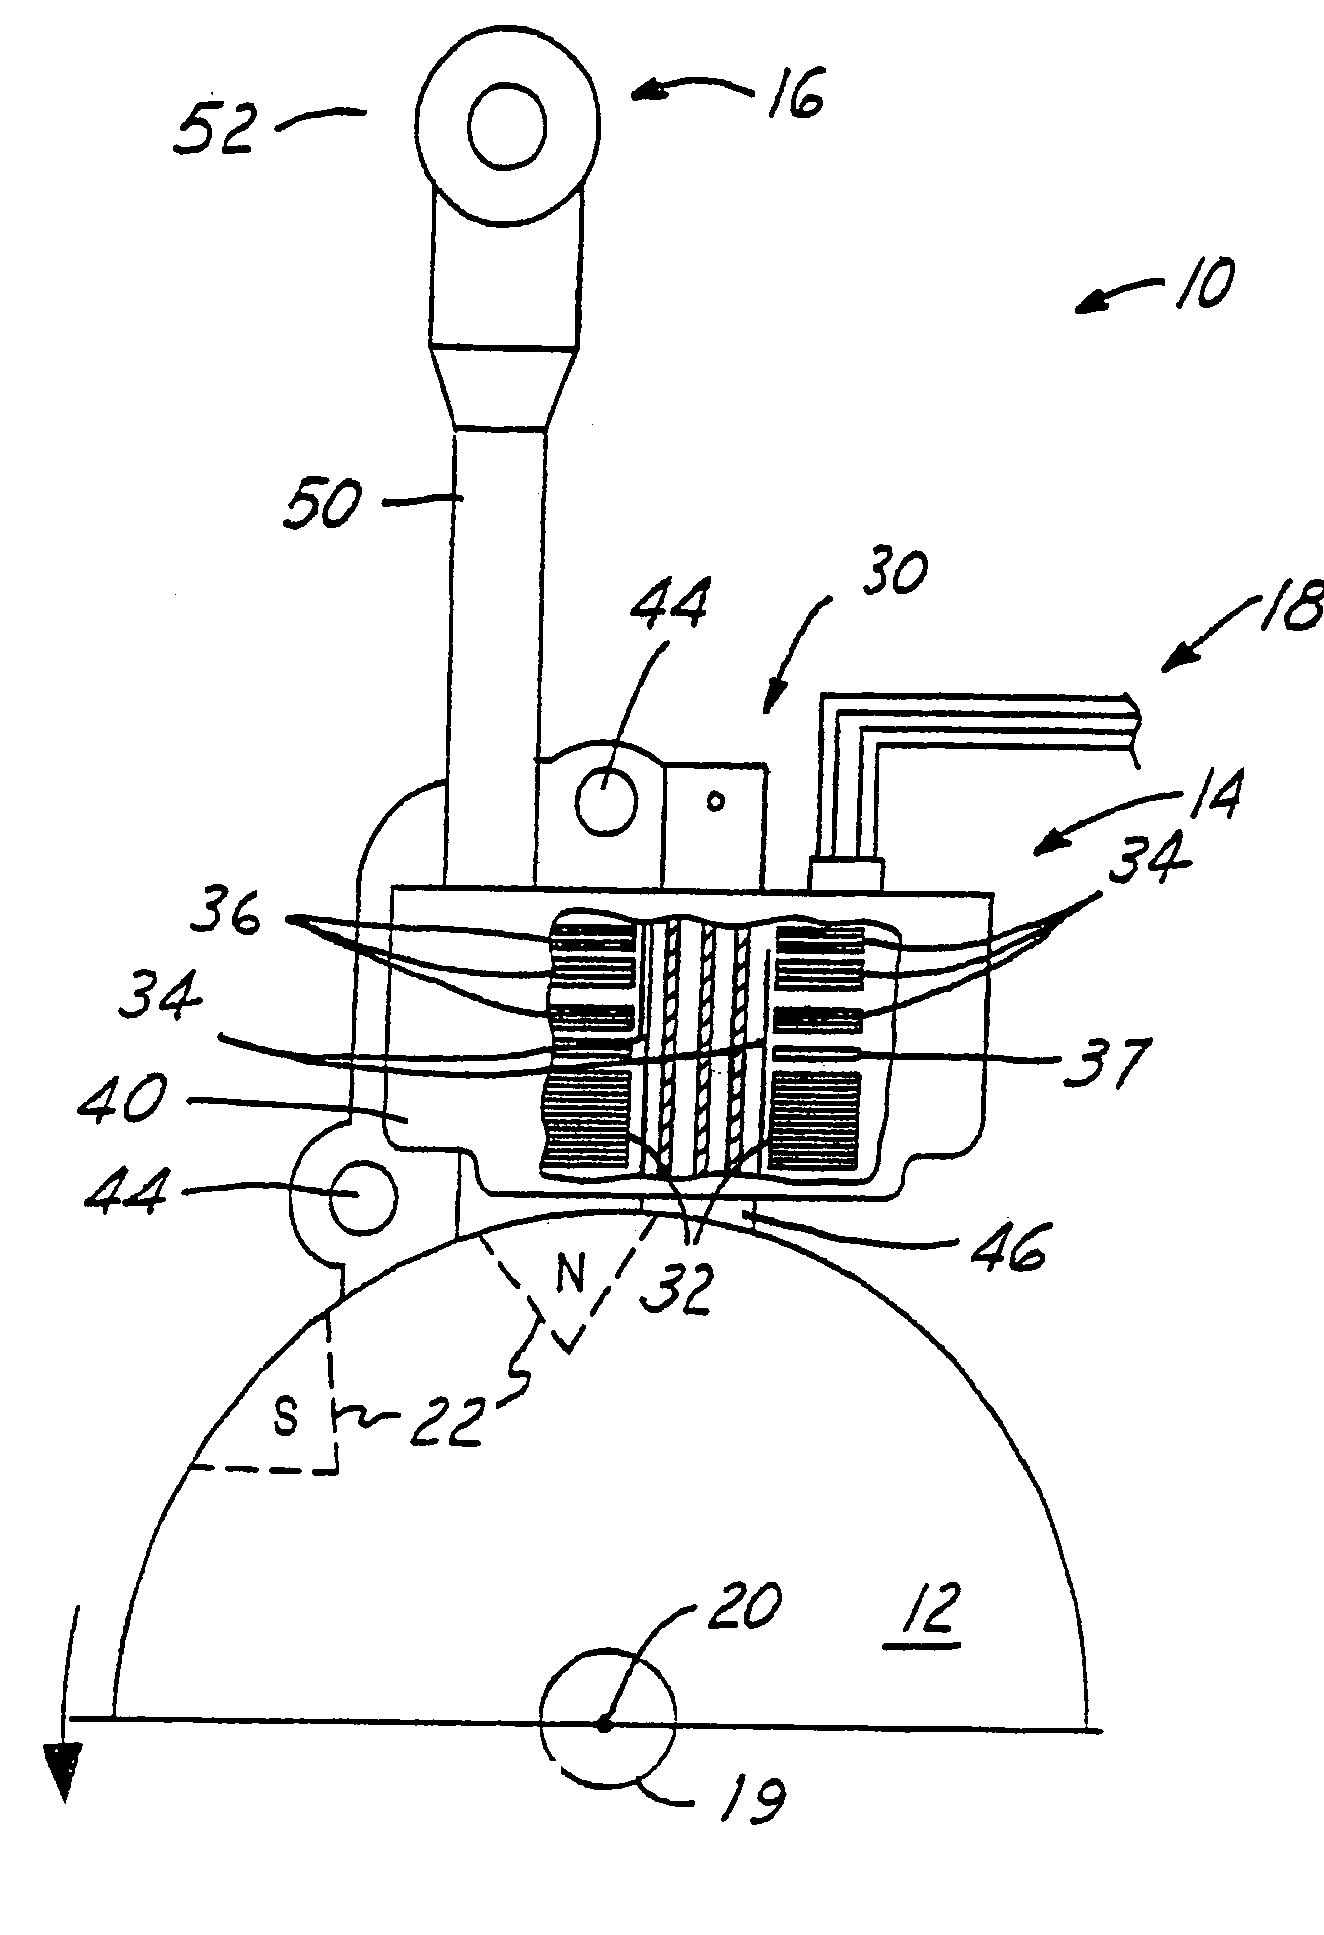 Ignition timing control system for light duty combustion engines